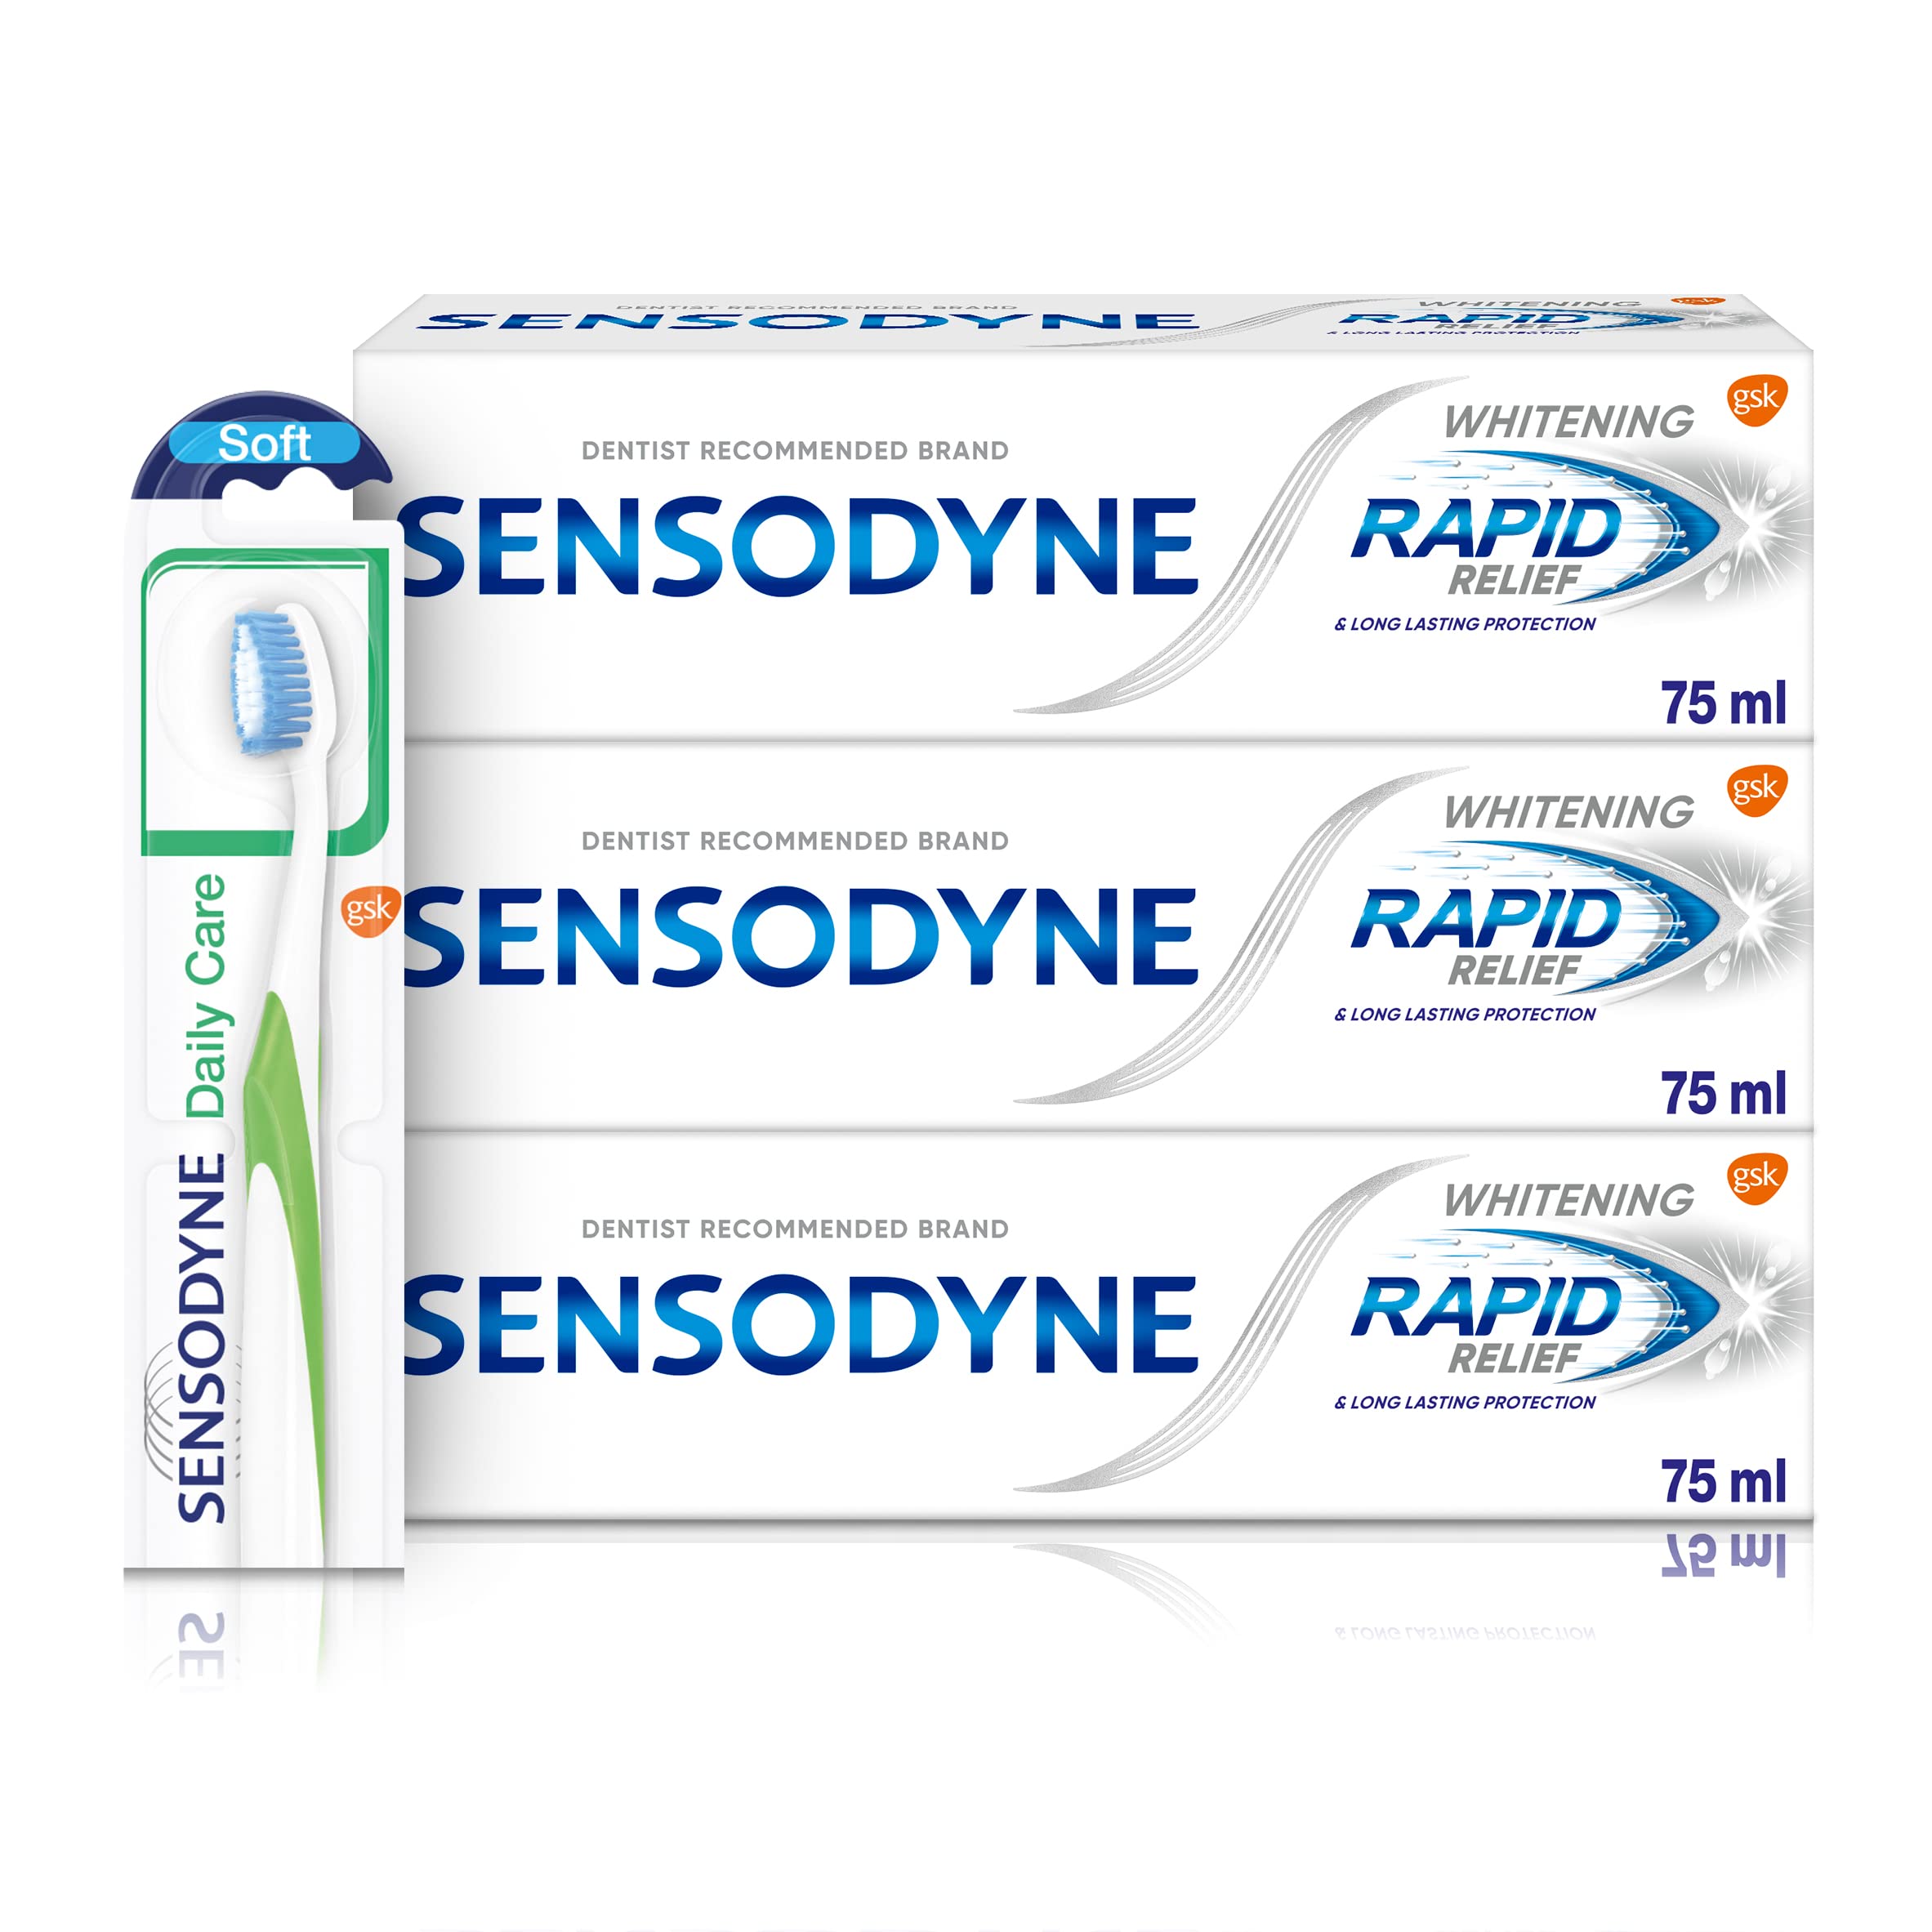 Sensodyne Sensitive Teeth Regime Kit with 3 Whitening Toothpaste and Daily Care Soft Toothbrush